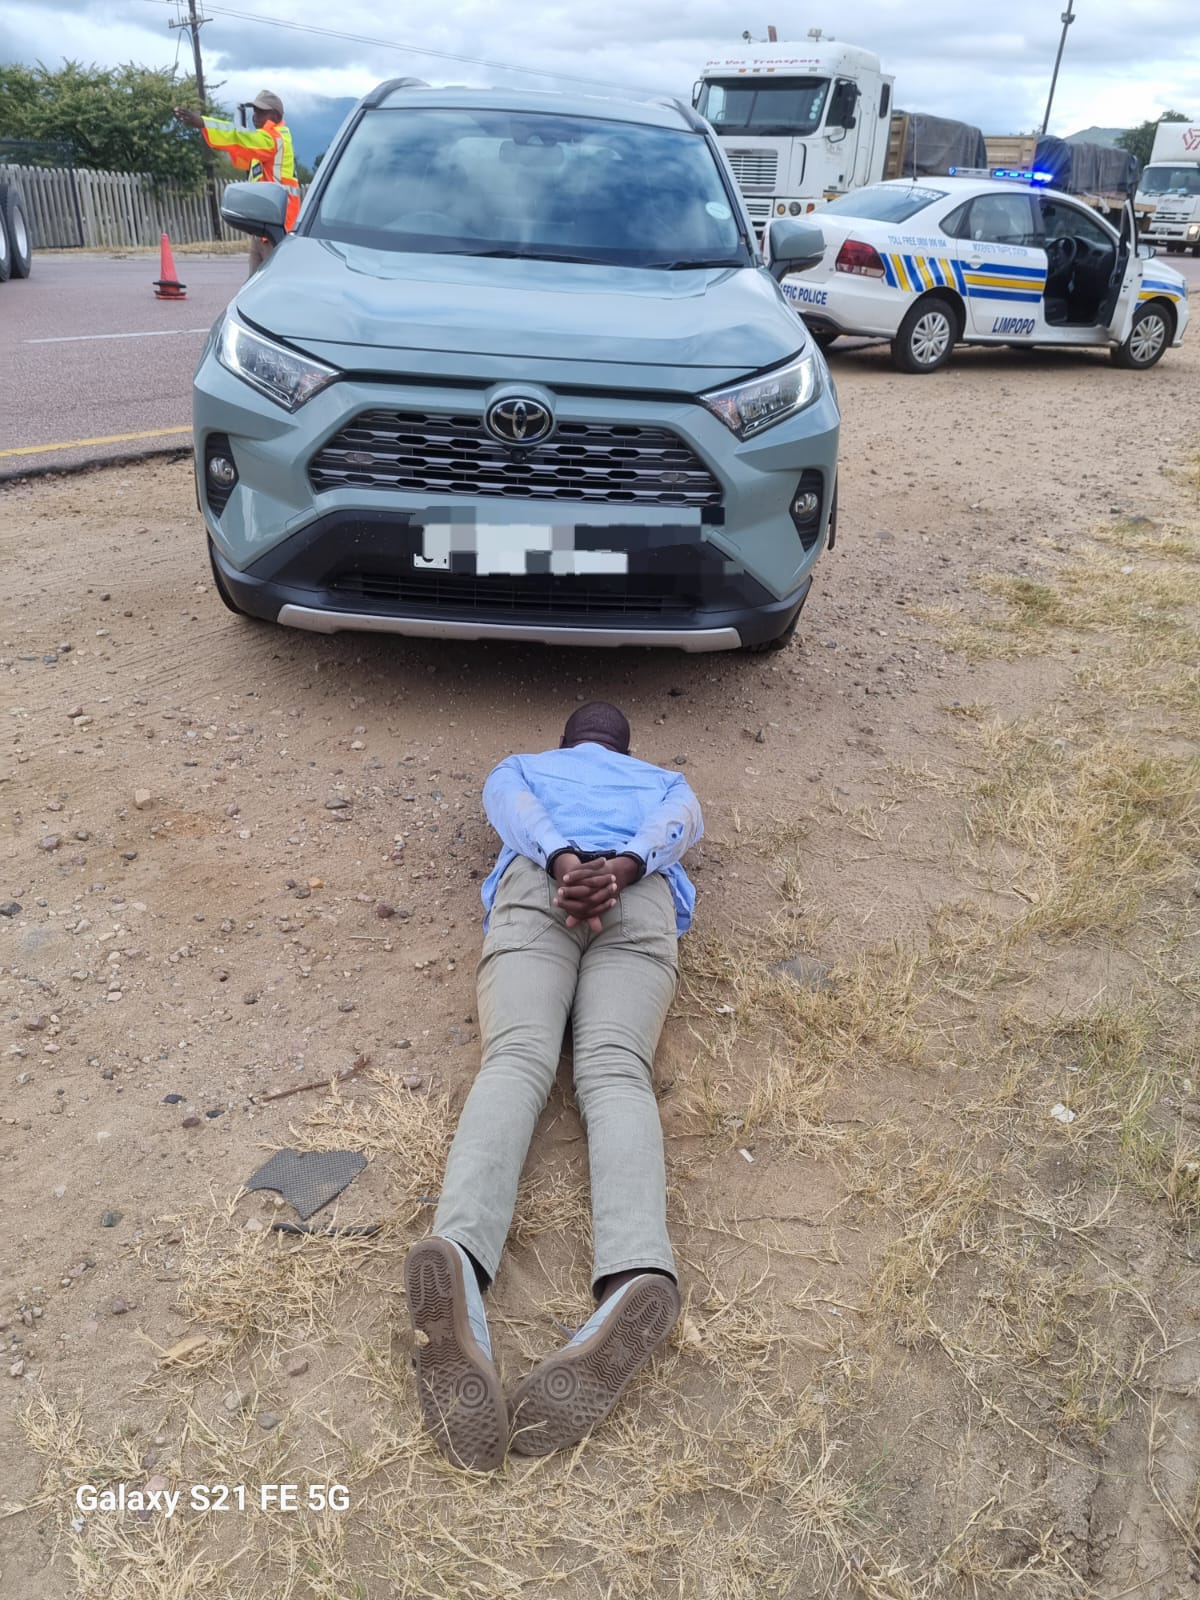 Limpopo Provincial Commissioner hails anti-smuggling operation following recent arrest